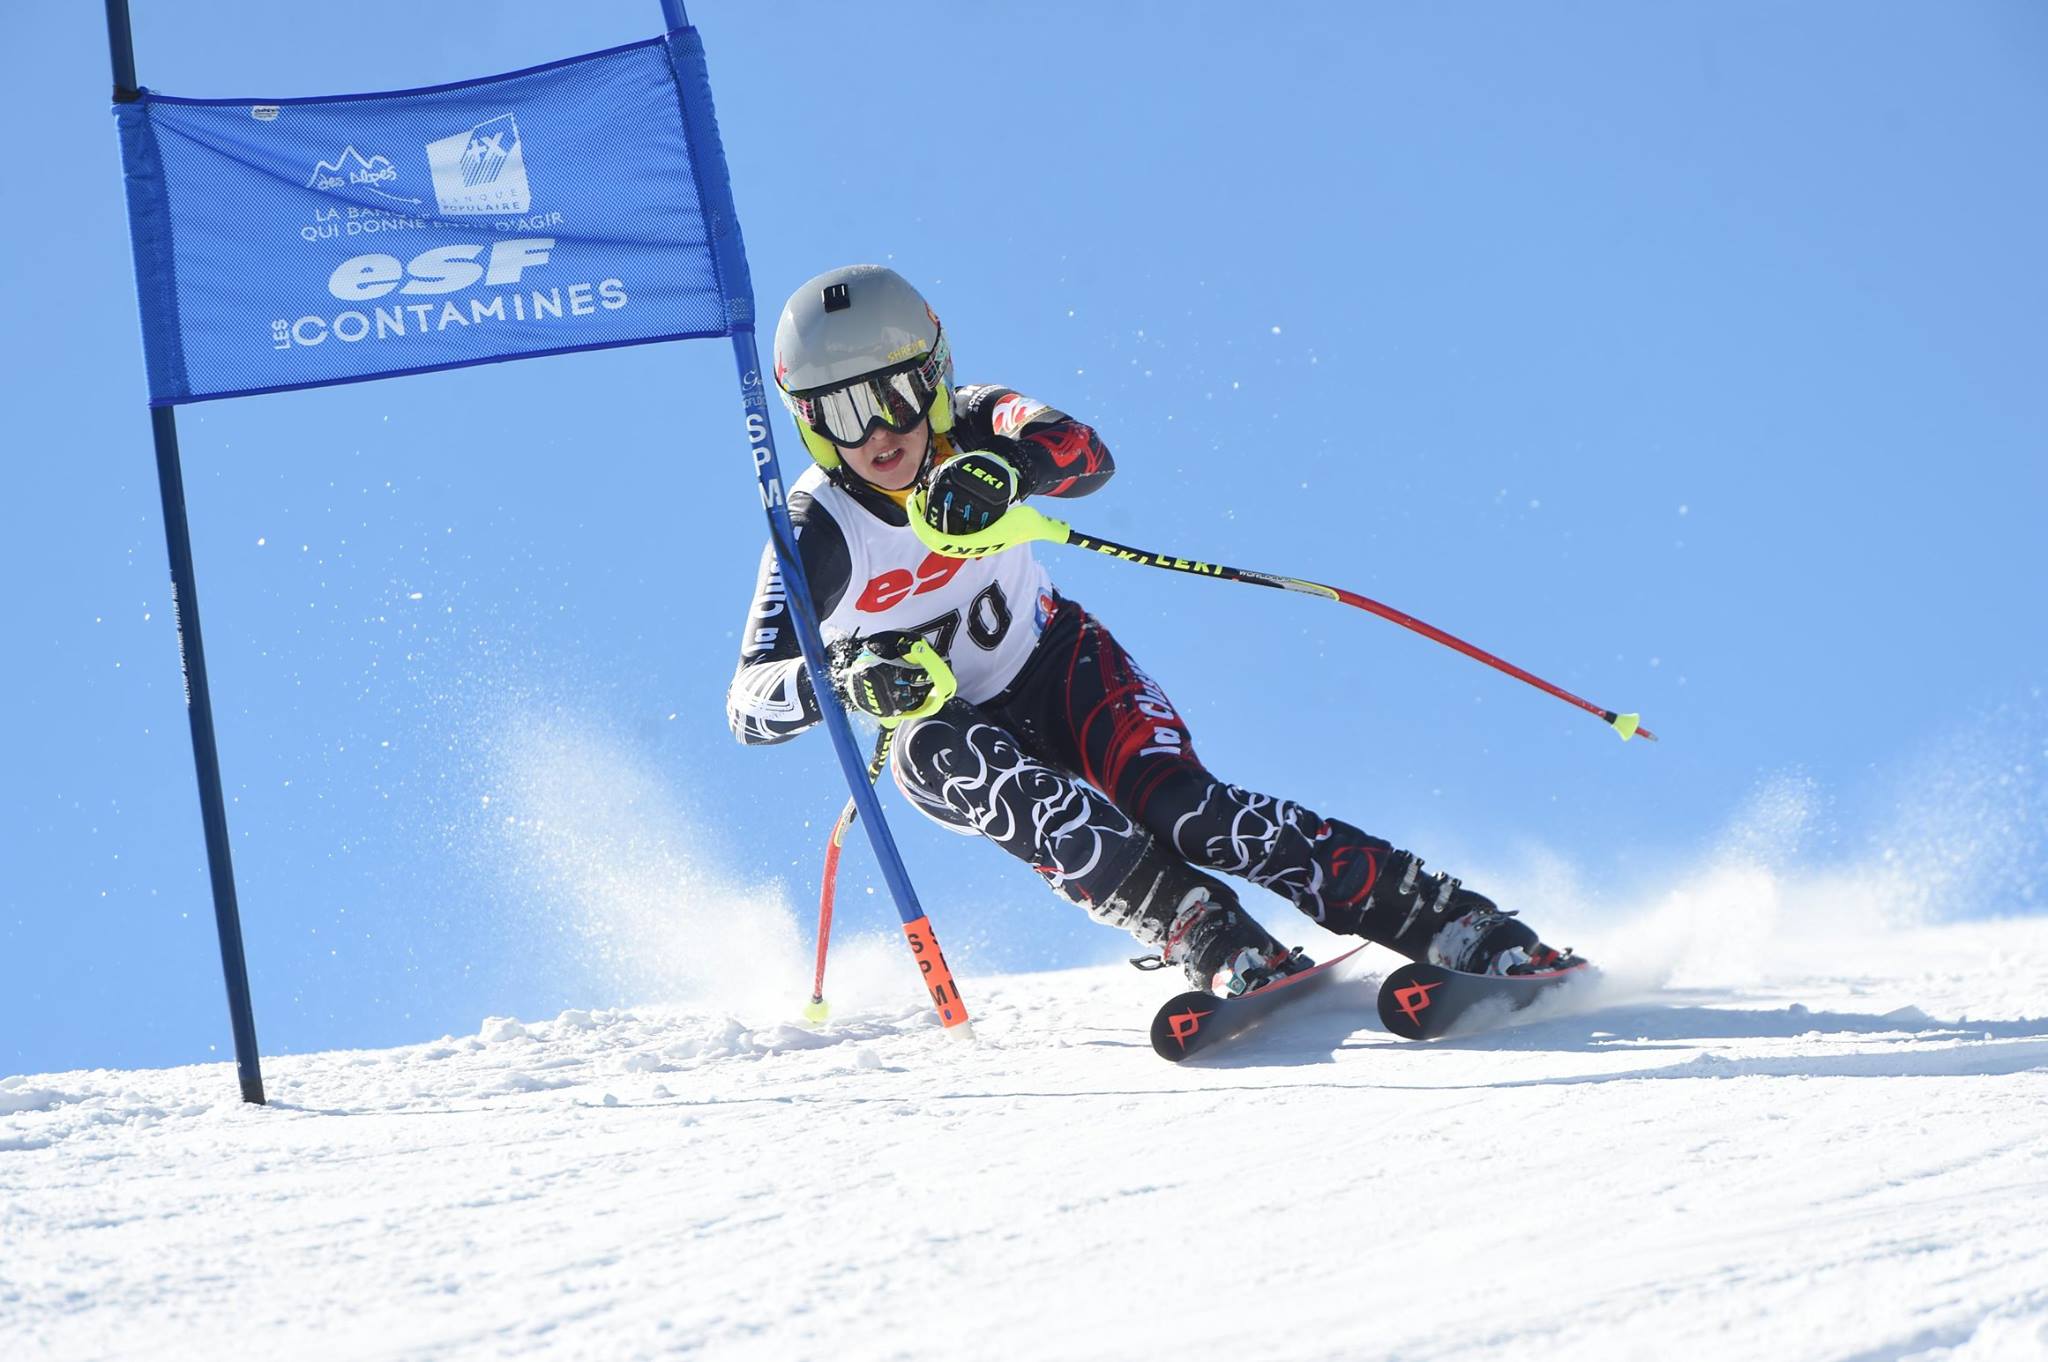 Nothing downhill about this CIS skier!